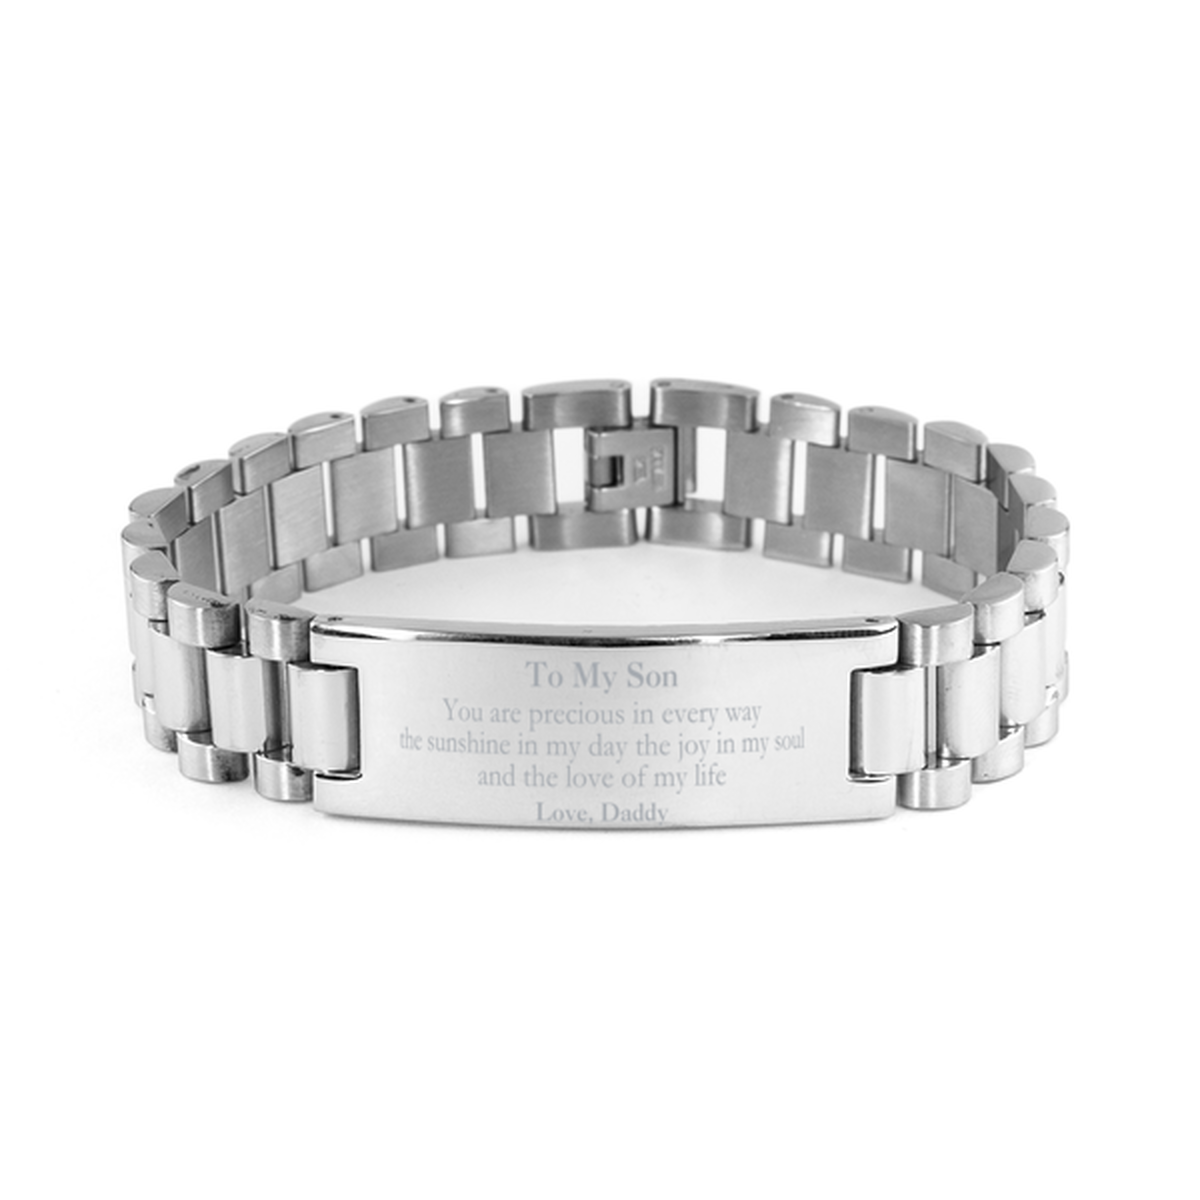 Graduation Gifts for Son Ladder Stainless Steel Bracelet Present from Daddy, Christmas Son Birthday Gifts Son You are precious in every way the sunshine in my day. Love, Daddy